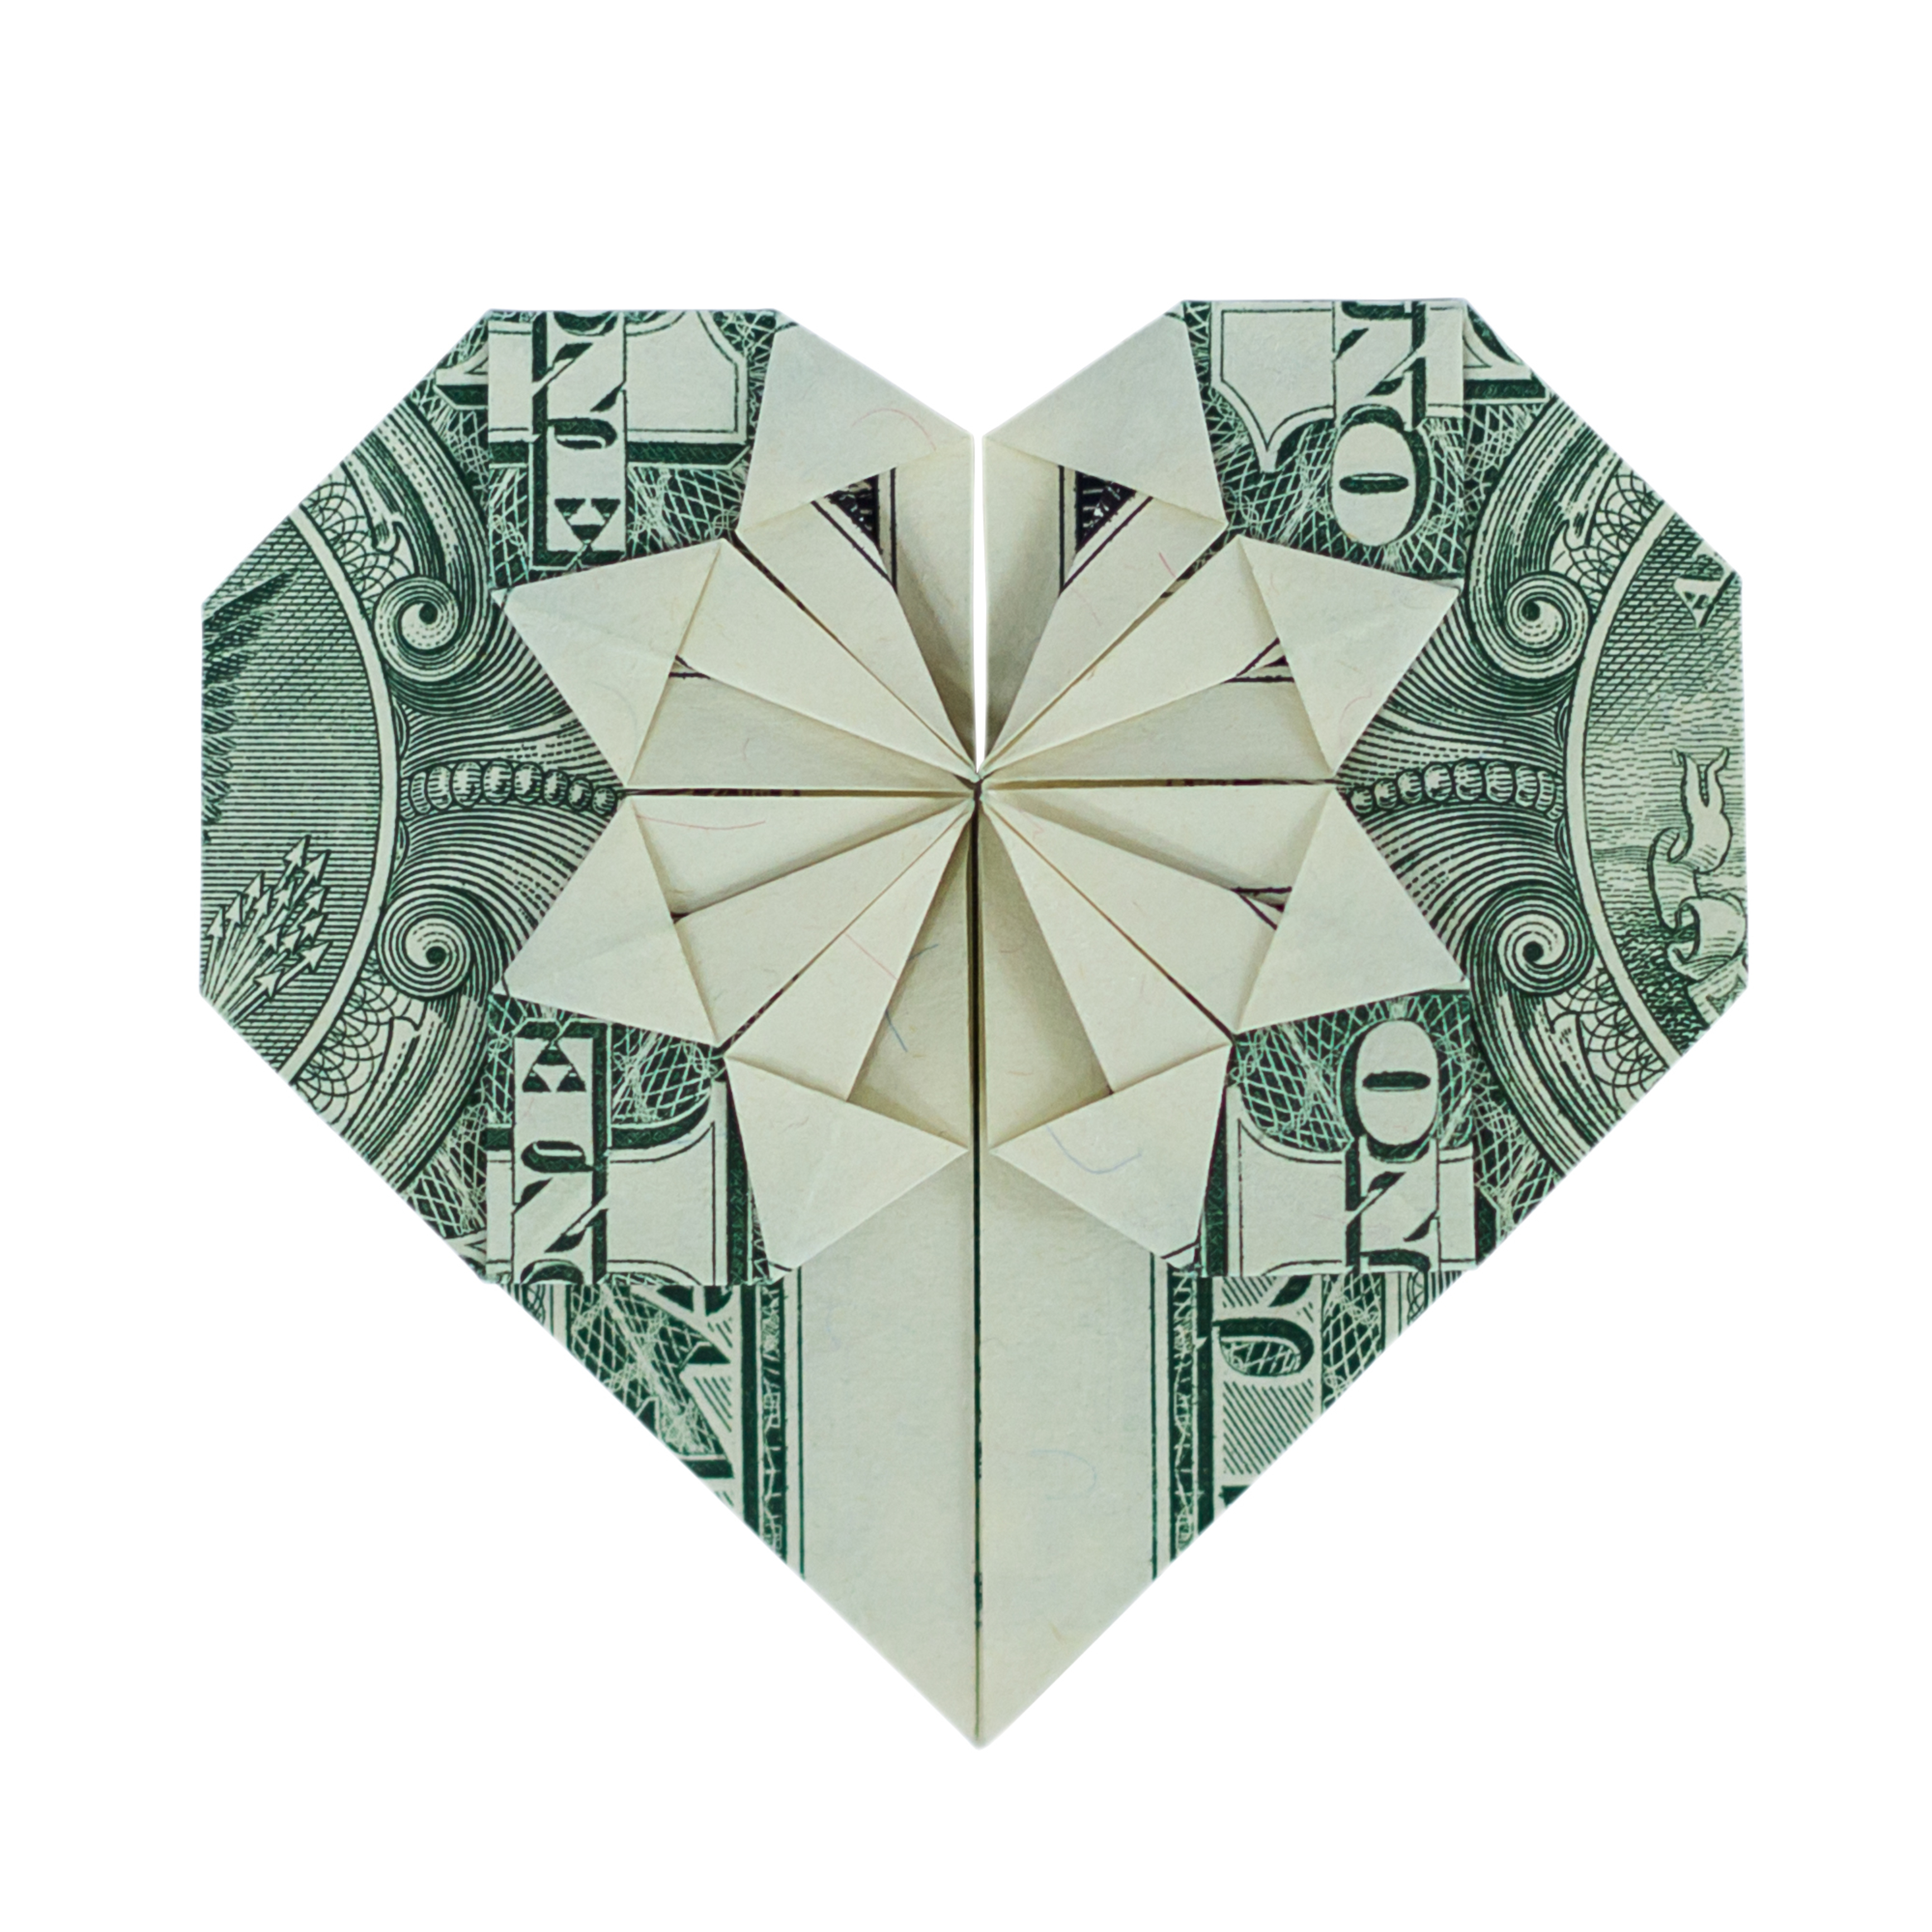 Origami Money Ideas Origami Heart Ideas And How To The Dating Divas